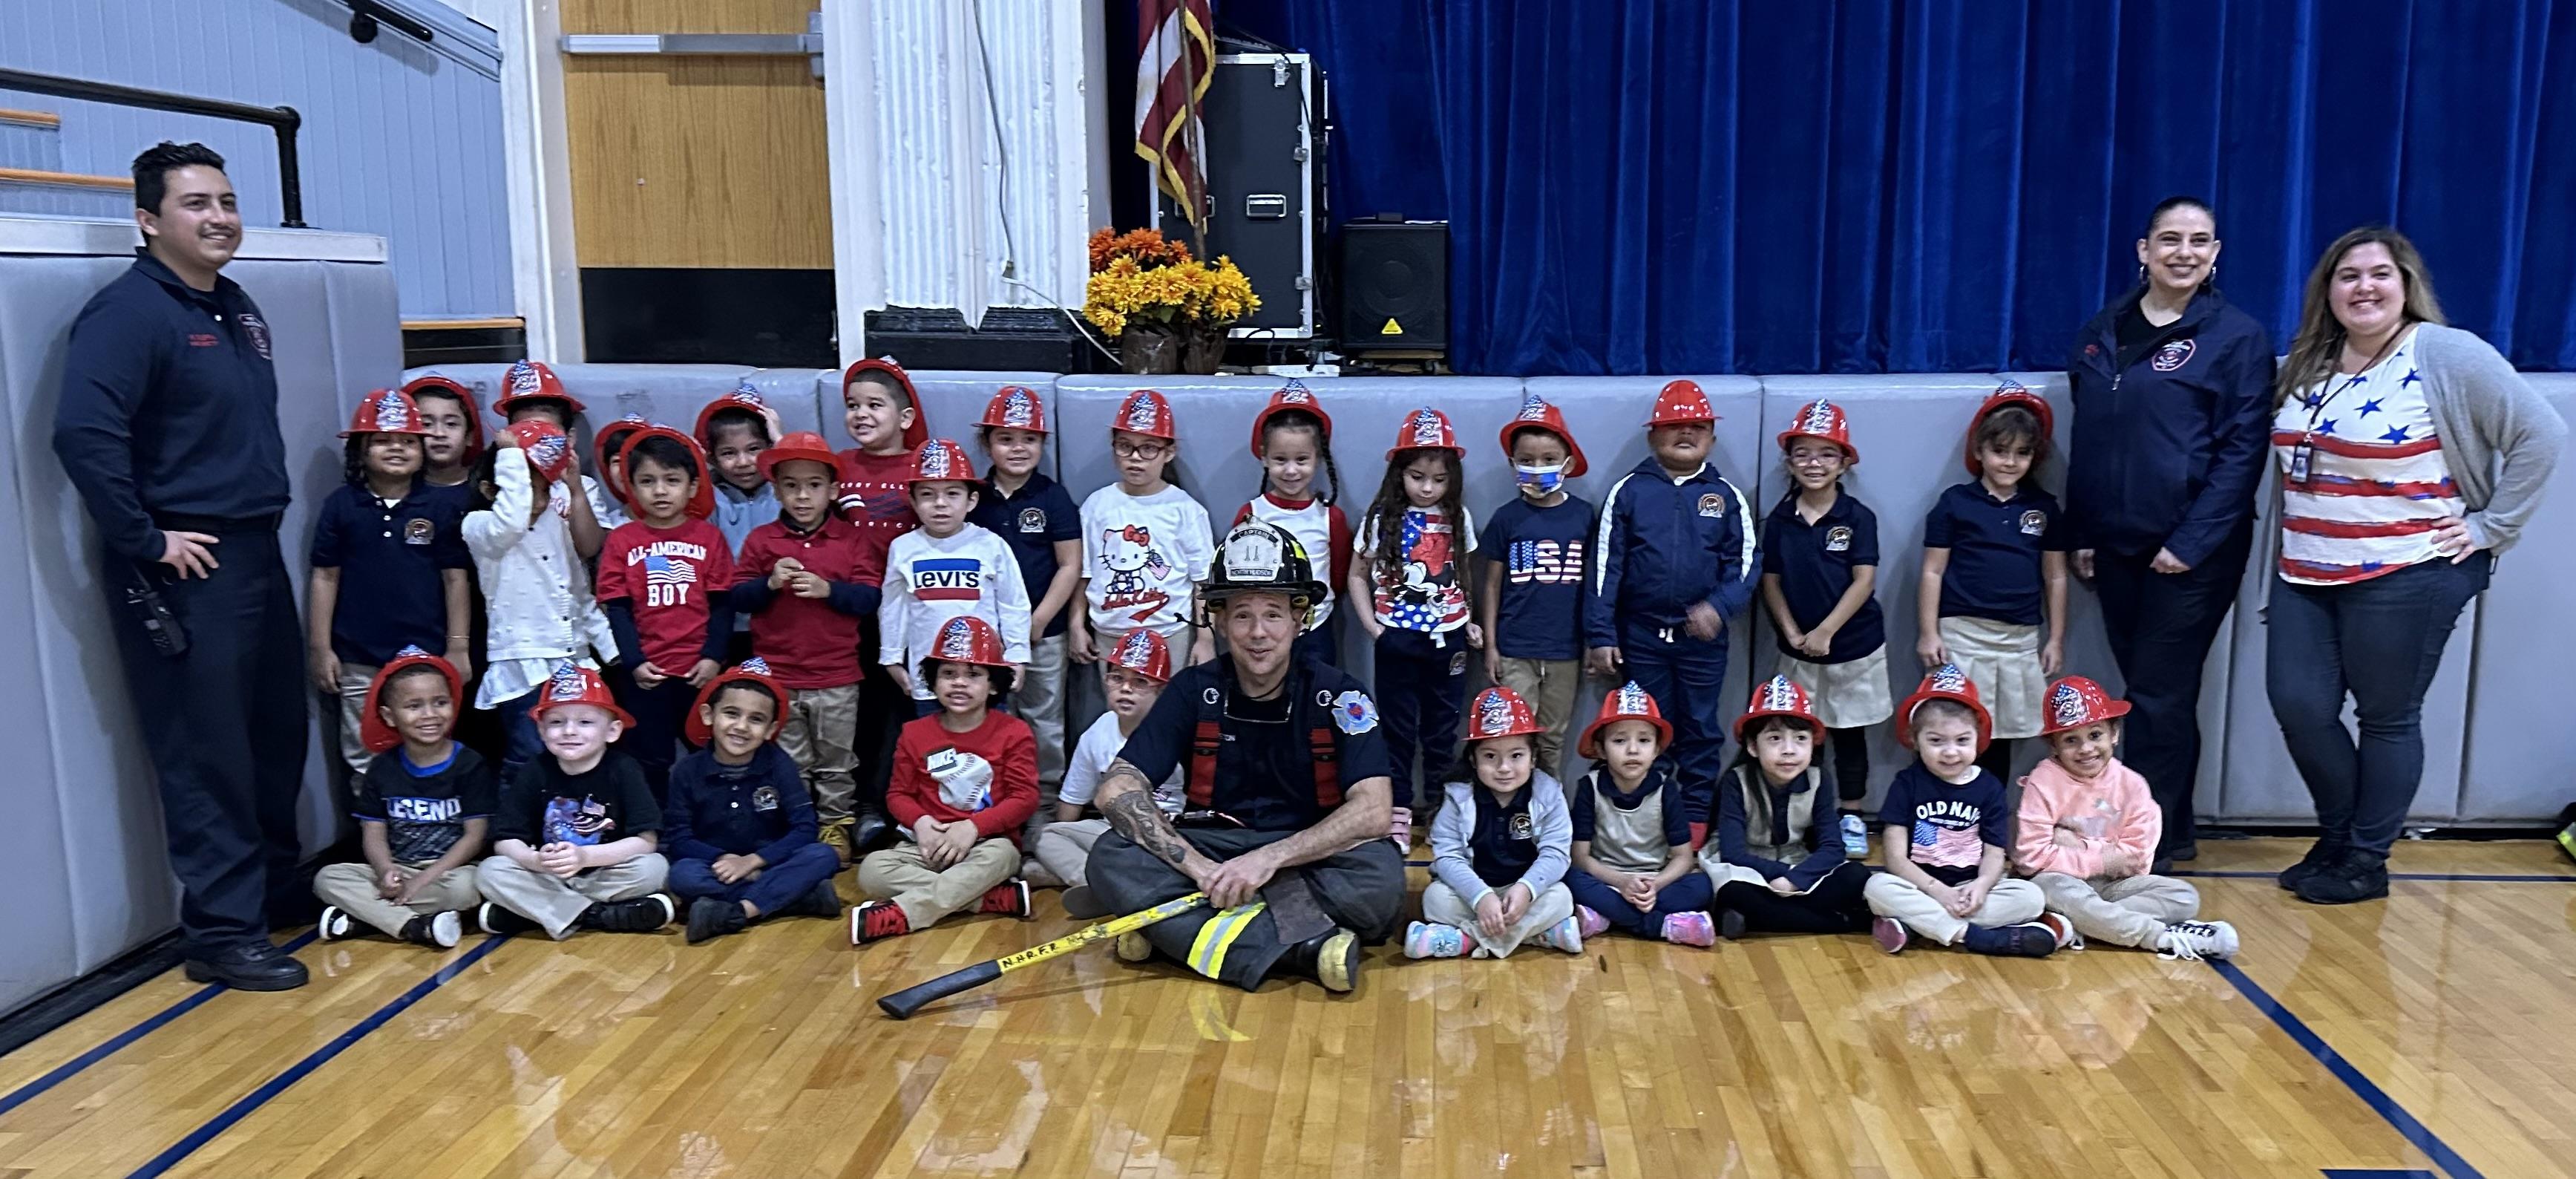 Fire Safety at the Washington School